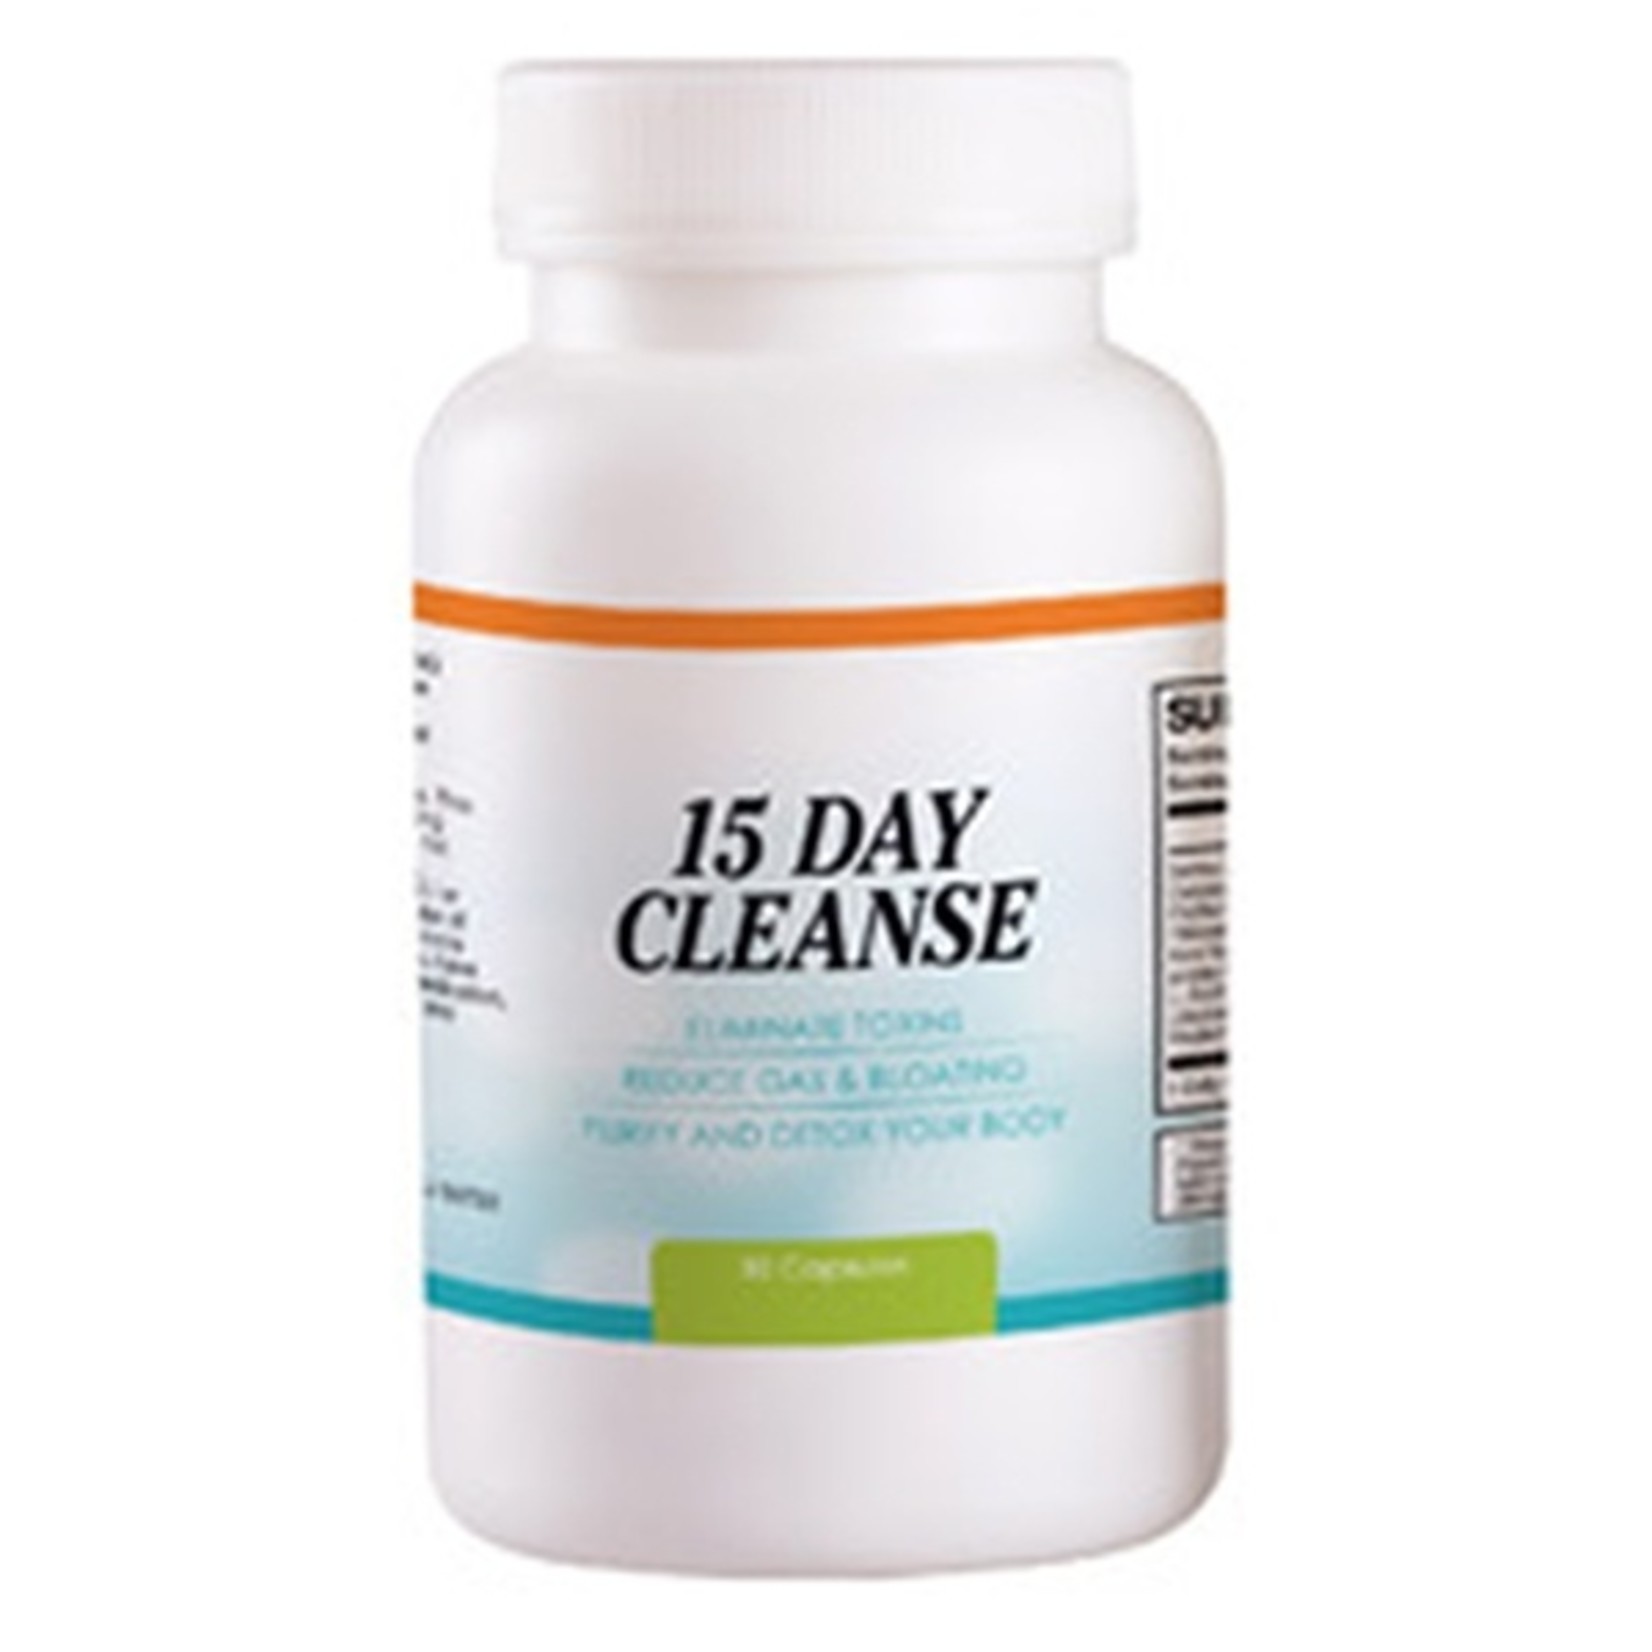 Pure Edge 15 DAY CLEANSE